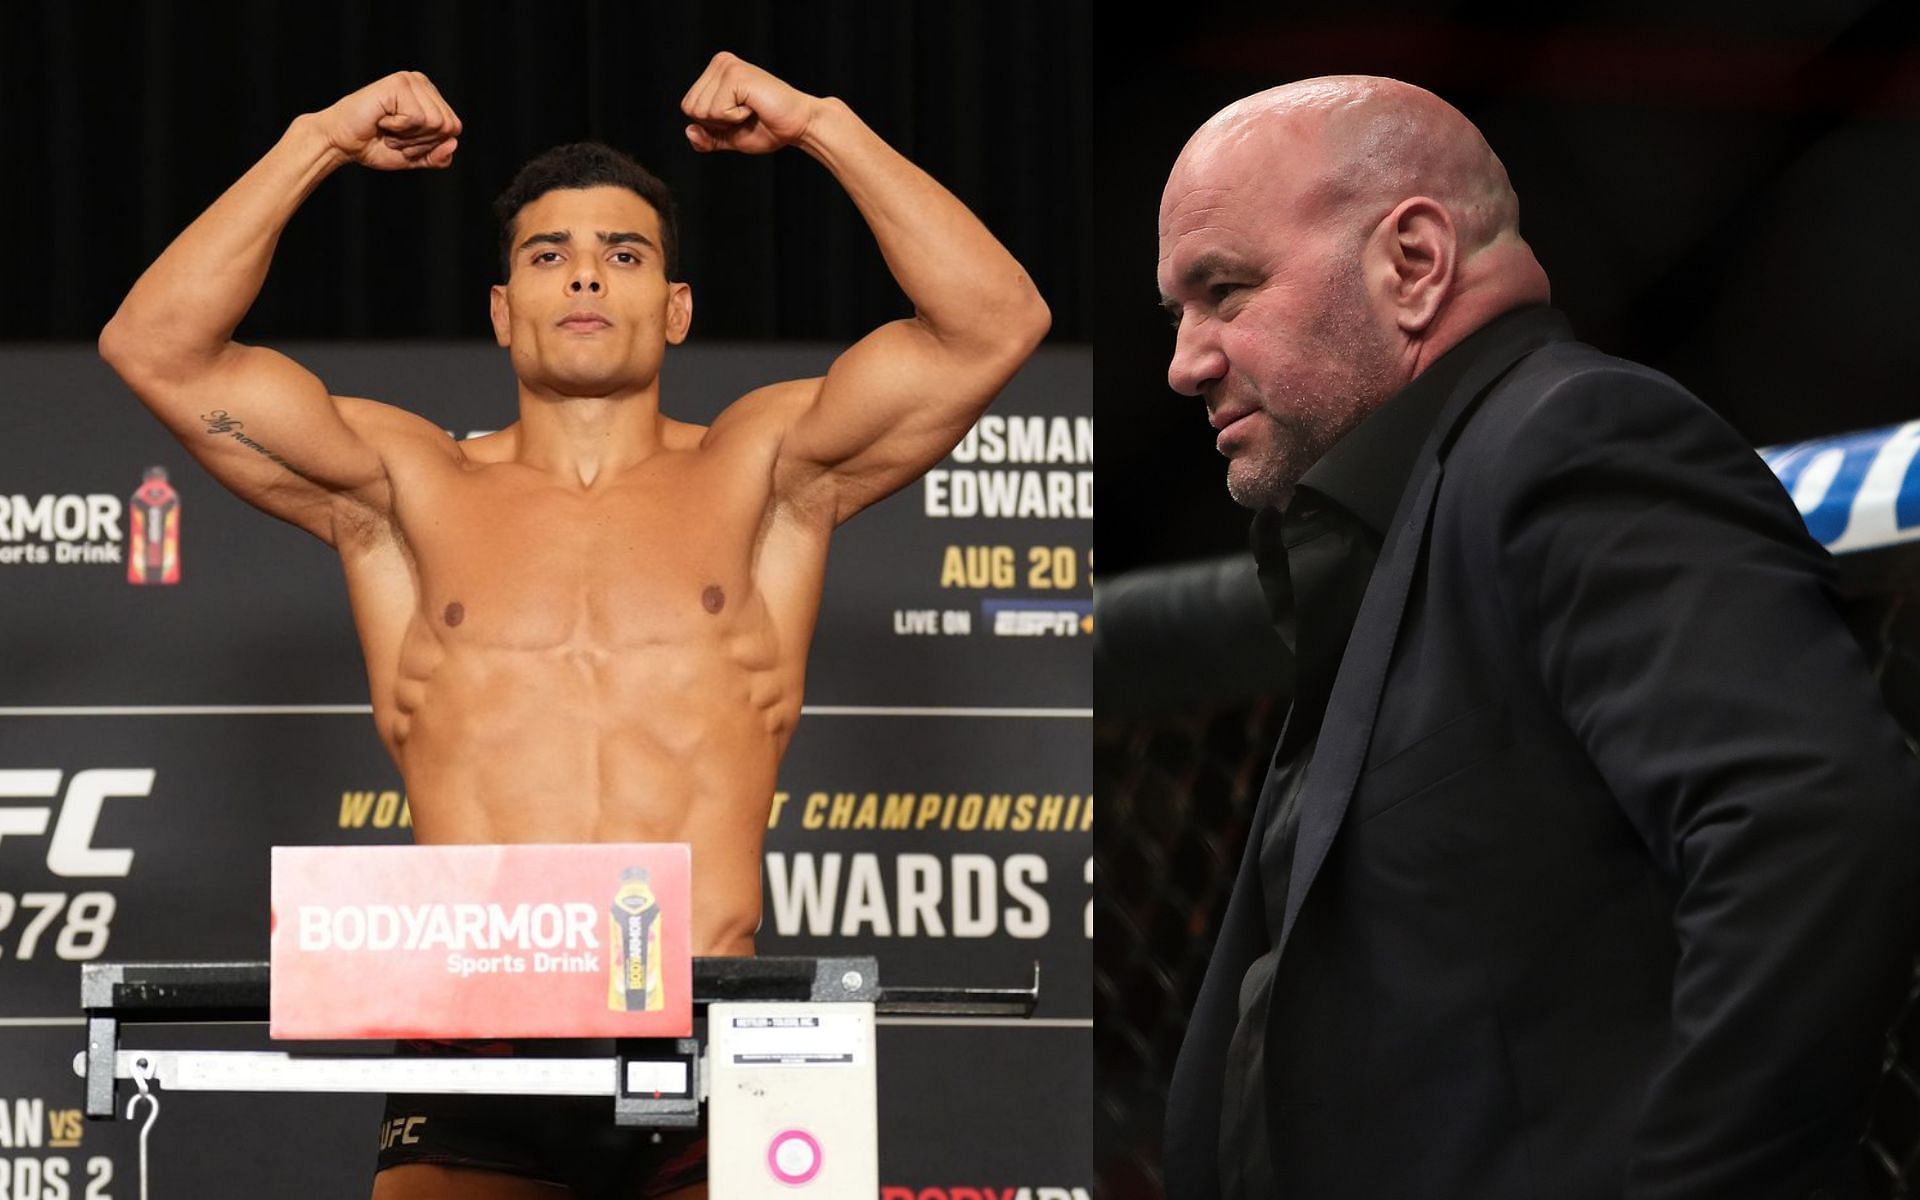 Paulo Costa (left) and Dana White (right). [Images courtesy: left image by Chris Unger/Zuffa LLC and right image from Getty Images]